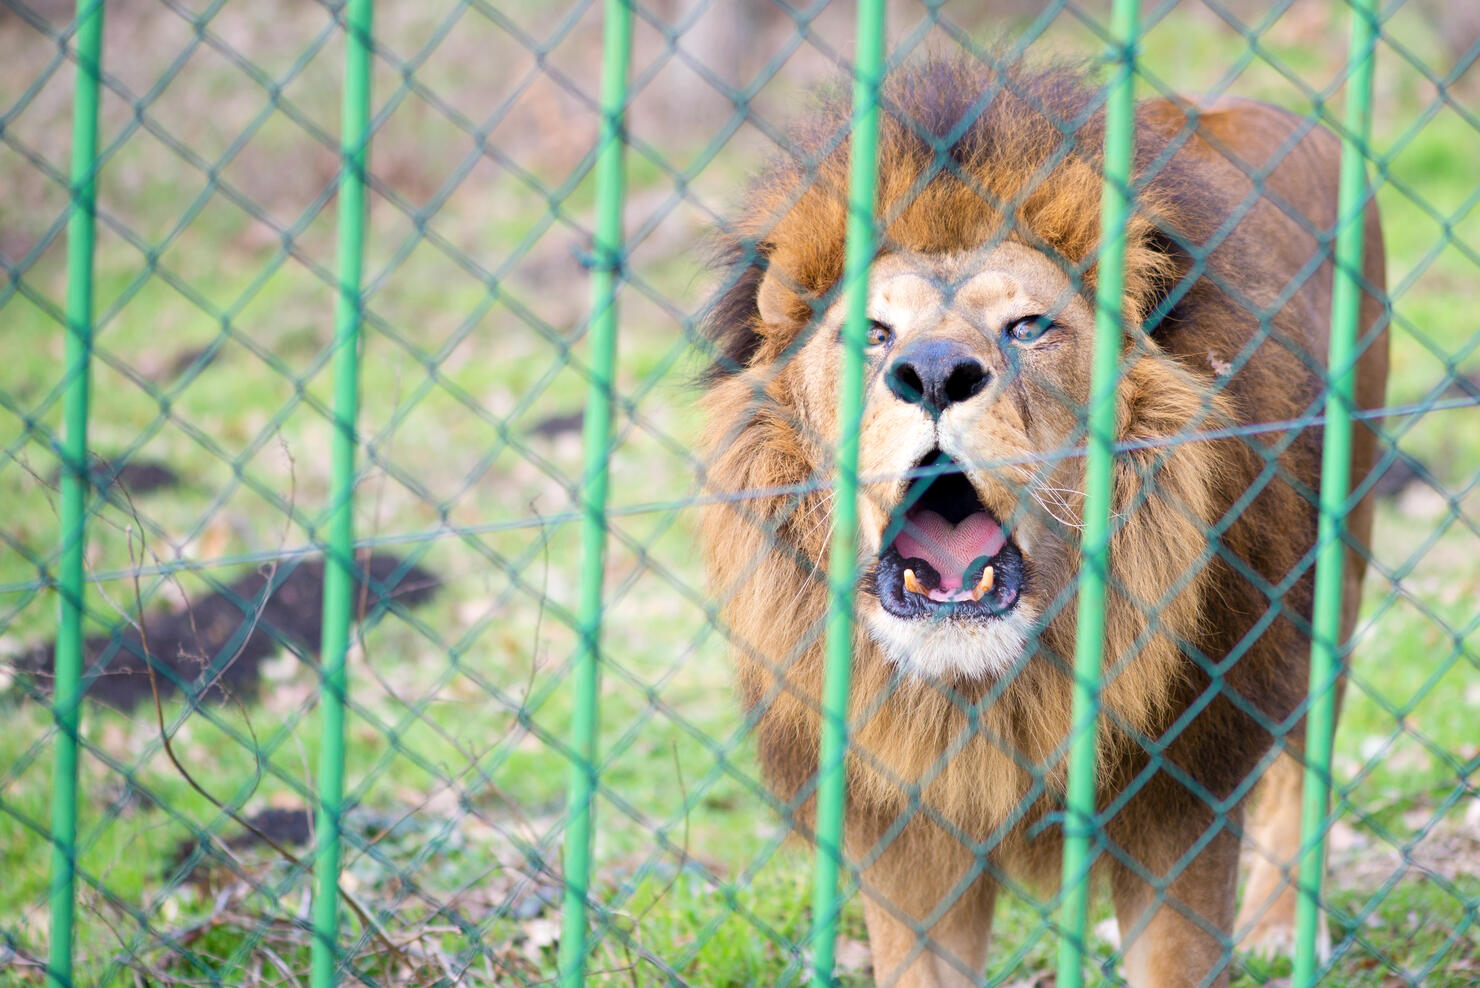 Lion in the zoo behind the fence